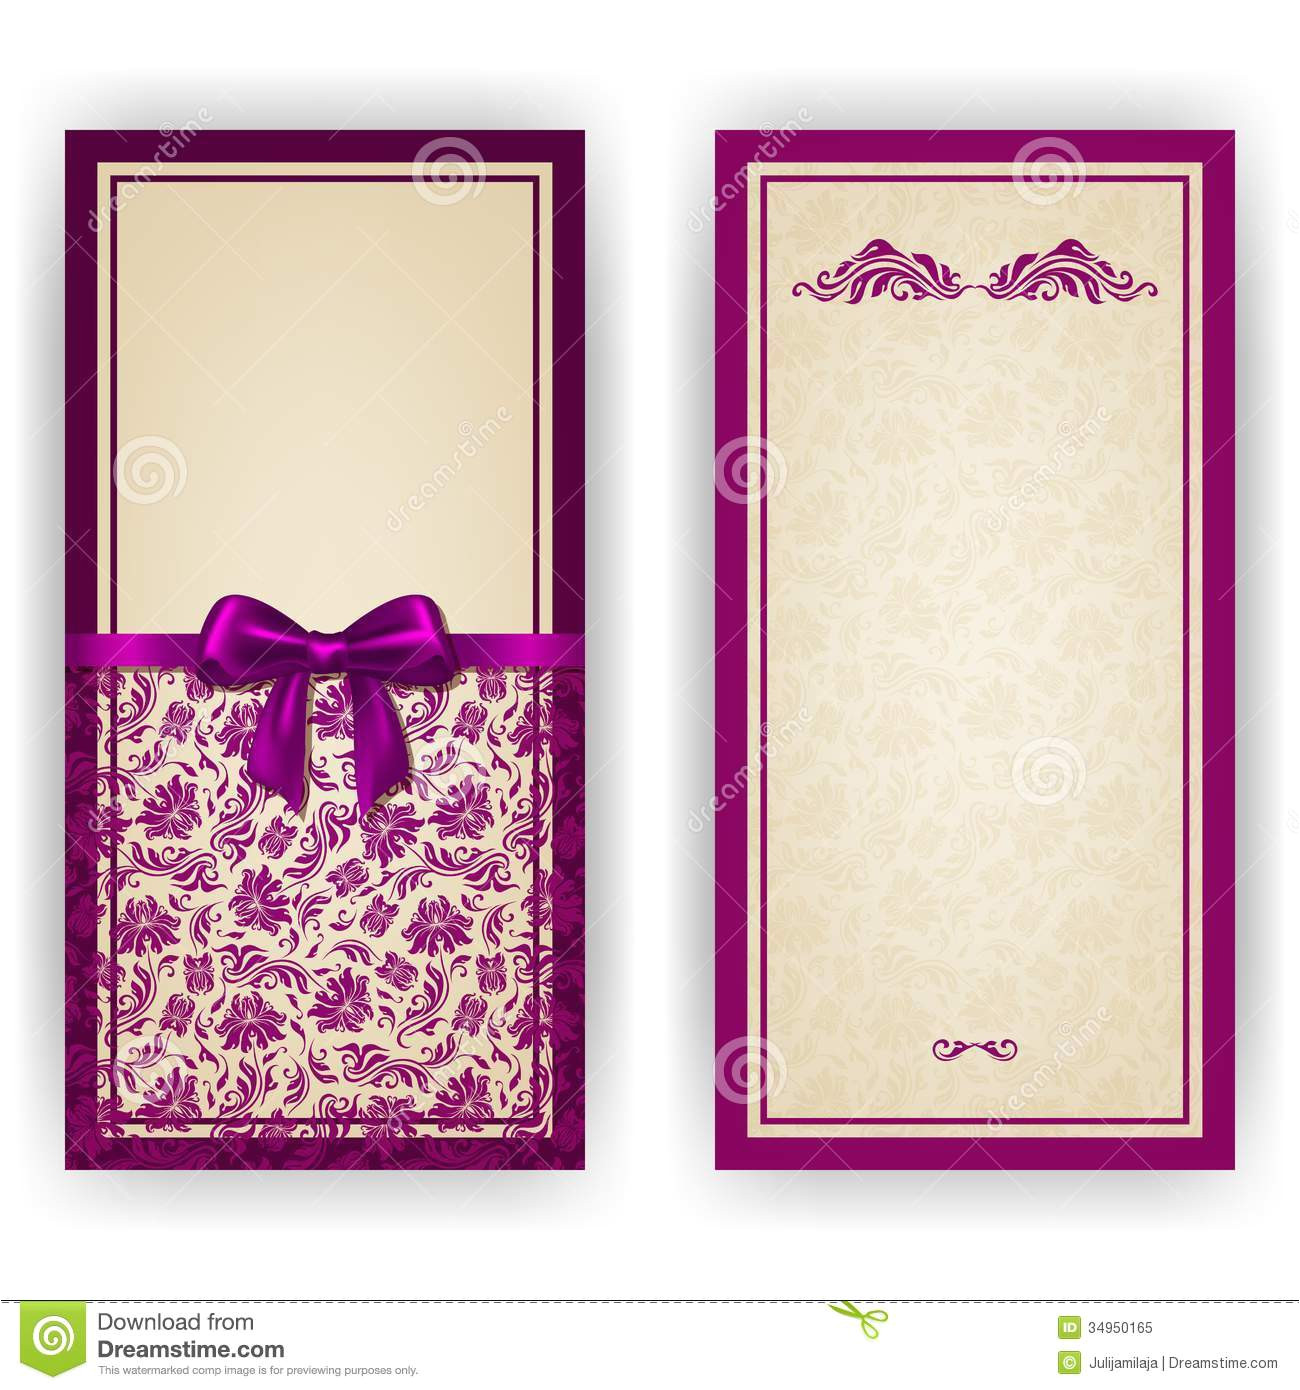 royalty free stock photo elegant vector template luxury invitation card lace ornament bow place text floral elements ornate background image34950165